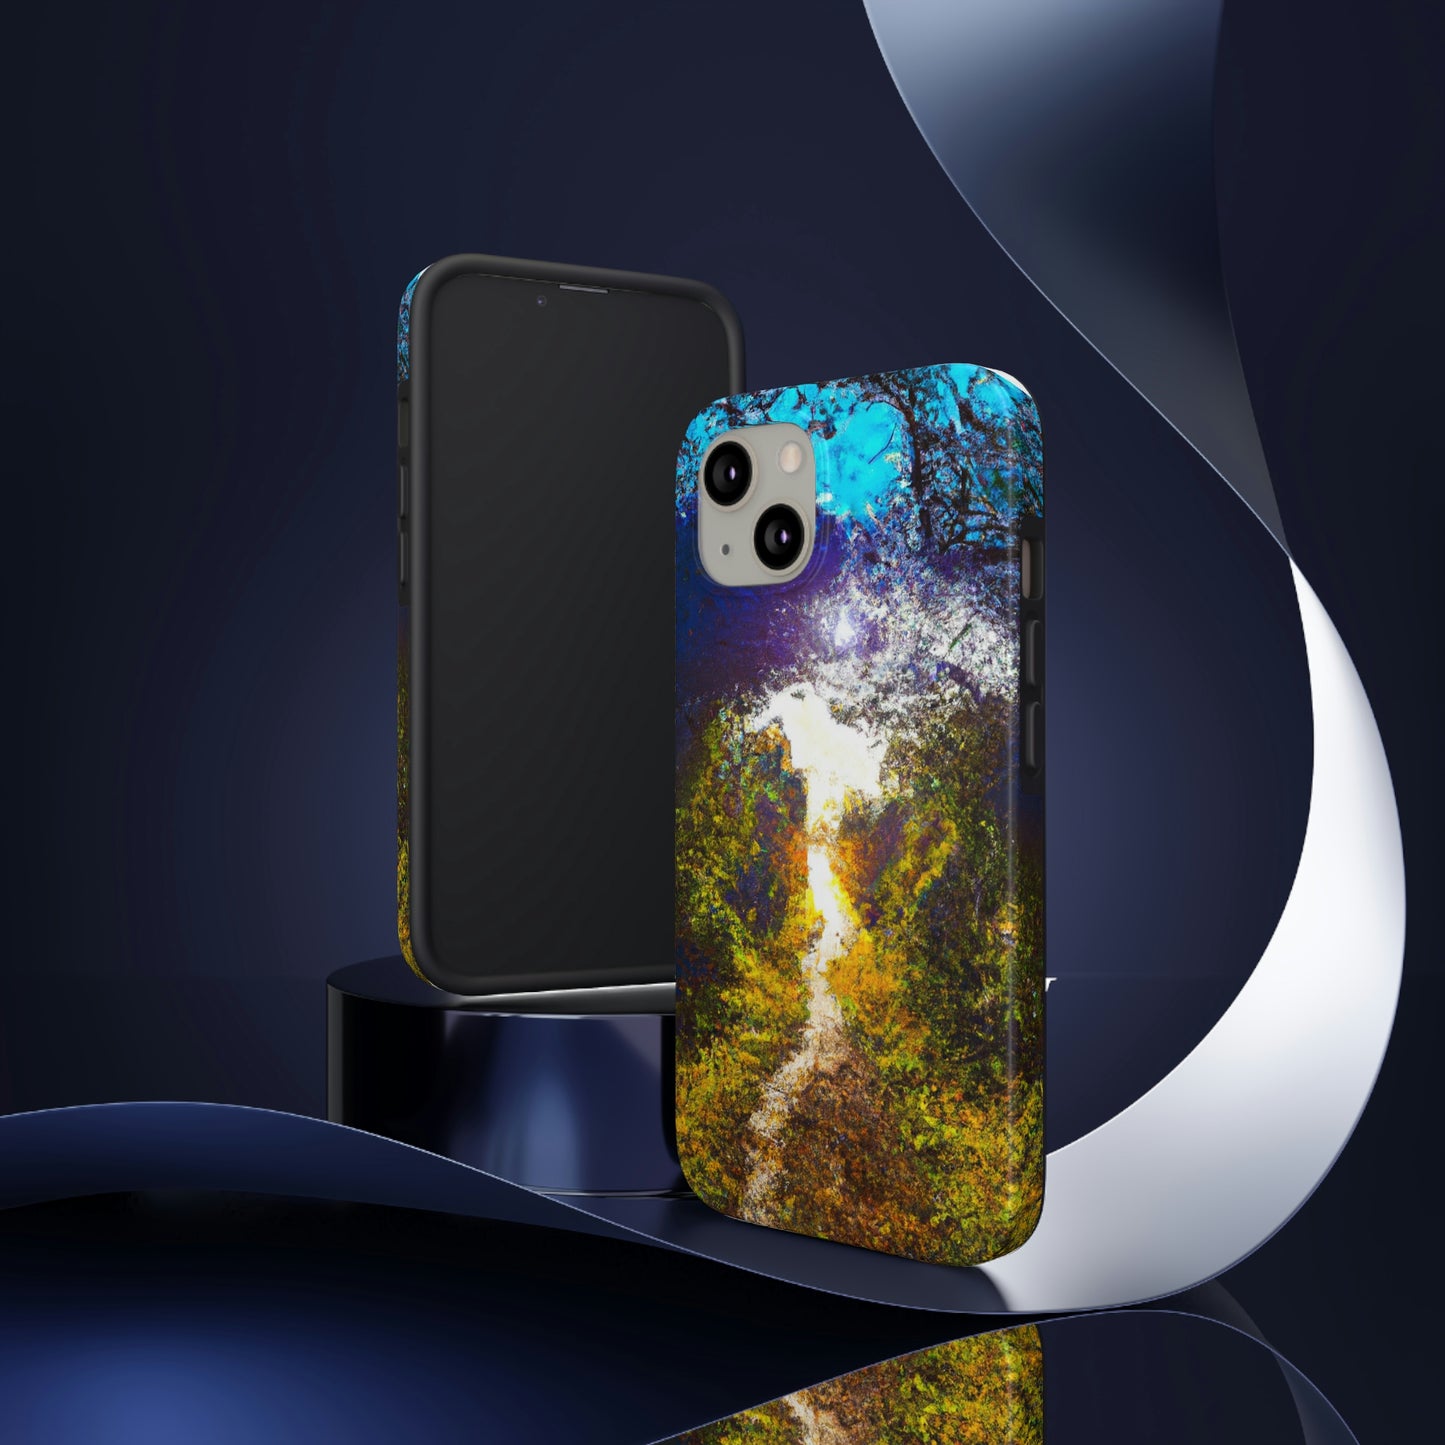 "A Beam of Light on a Forgotten Path" - The Alien Tough Phone Cases